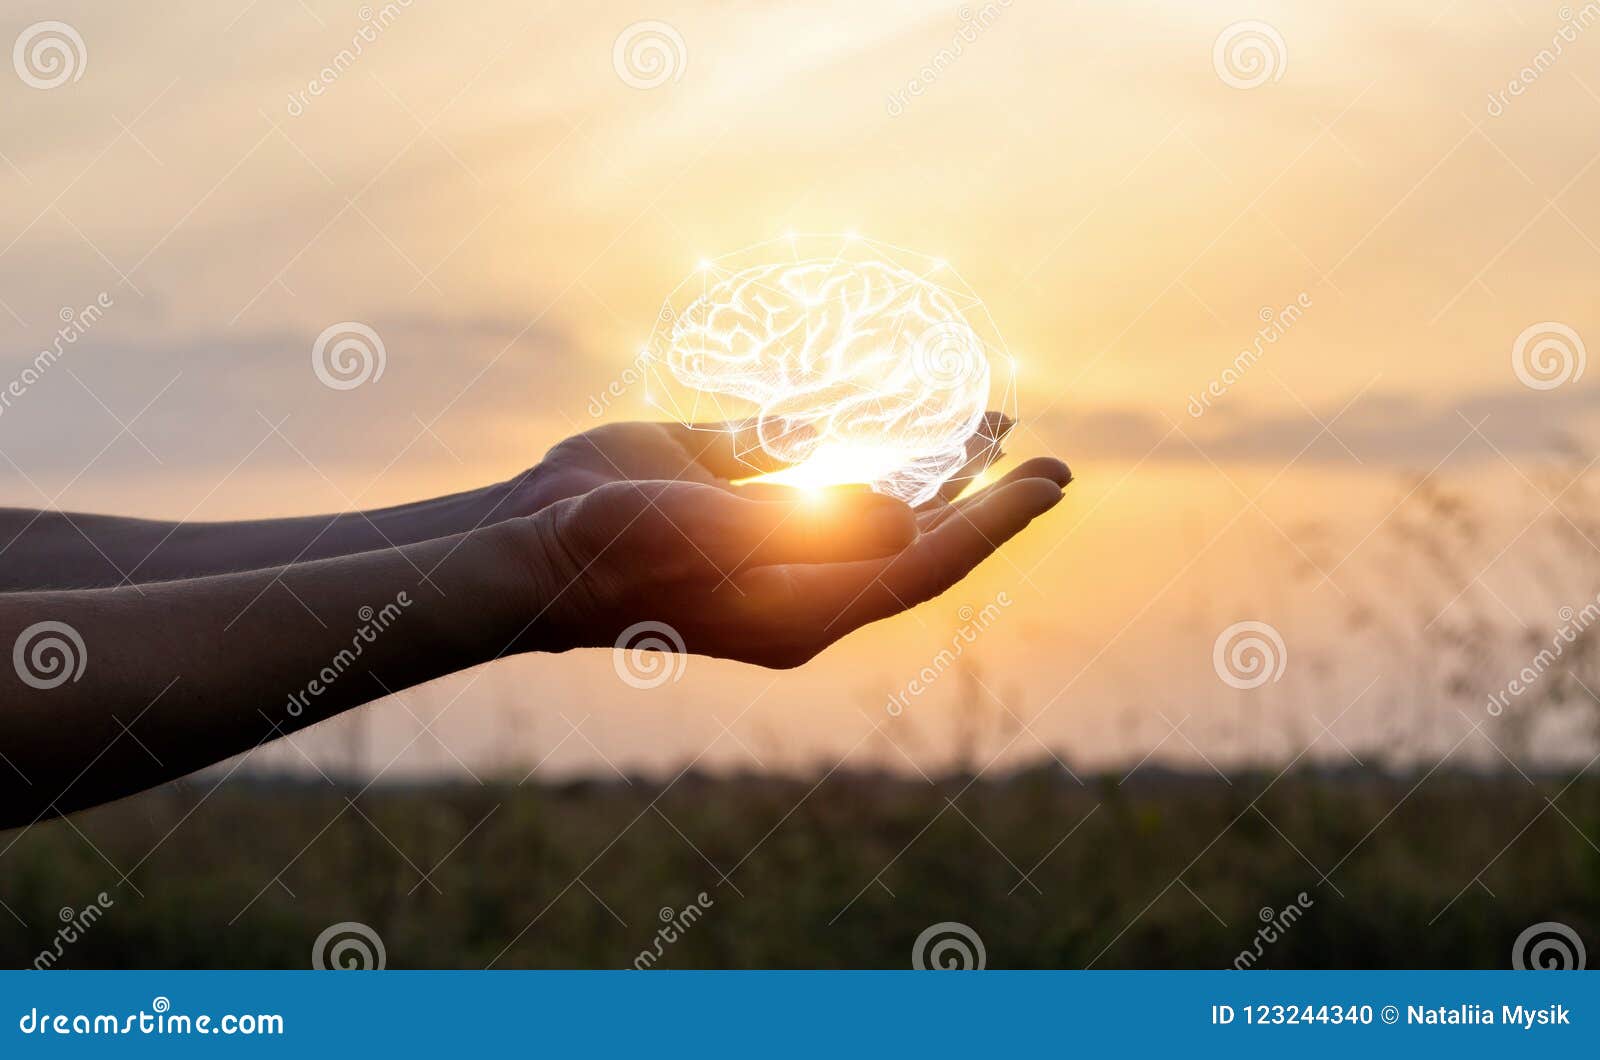 hands support the brain in the sun .